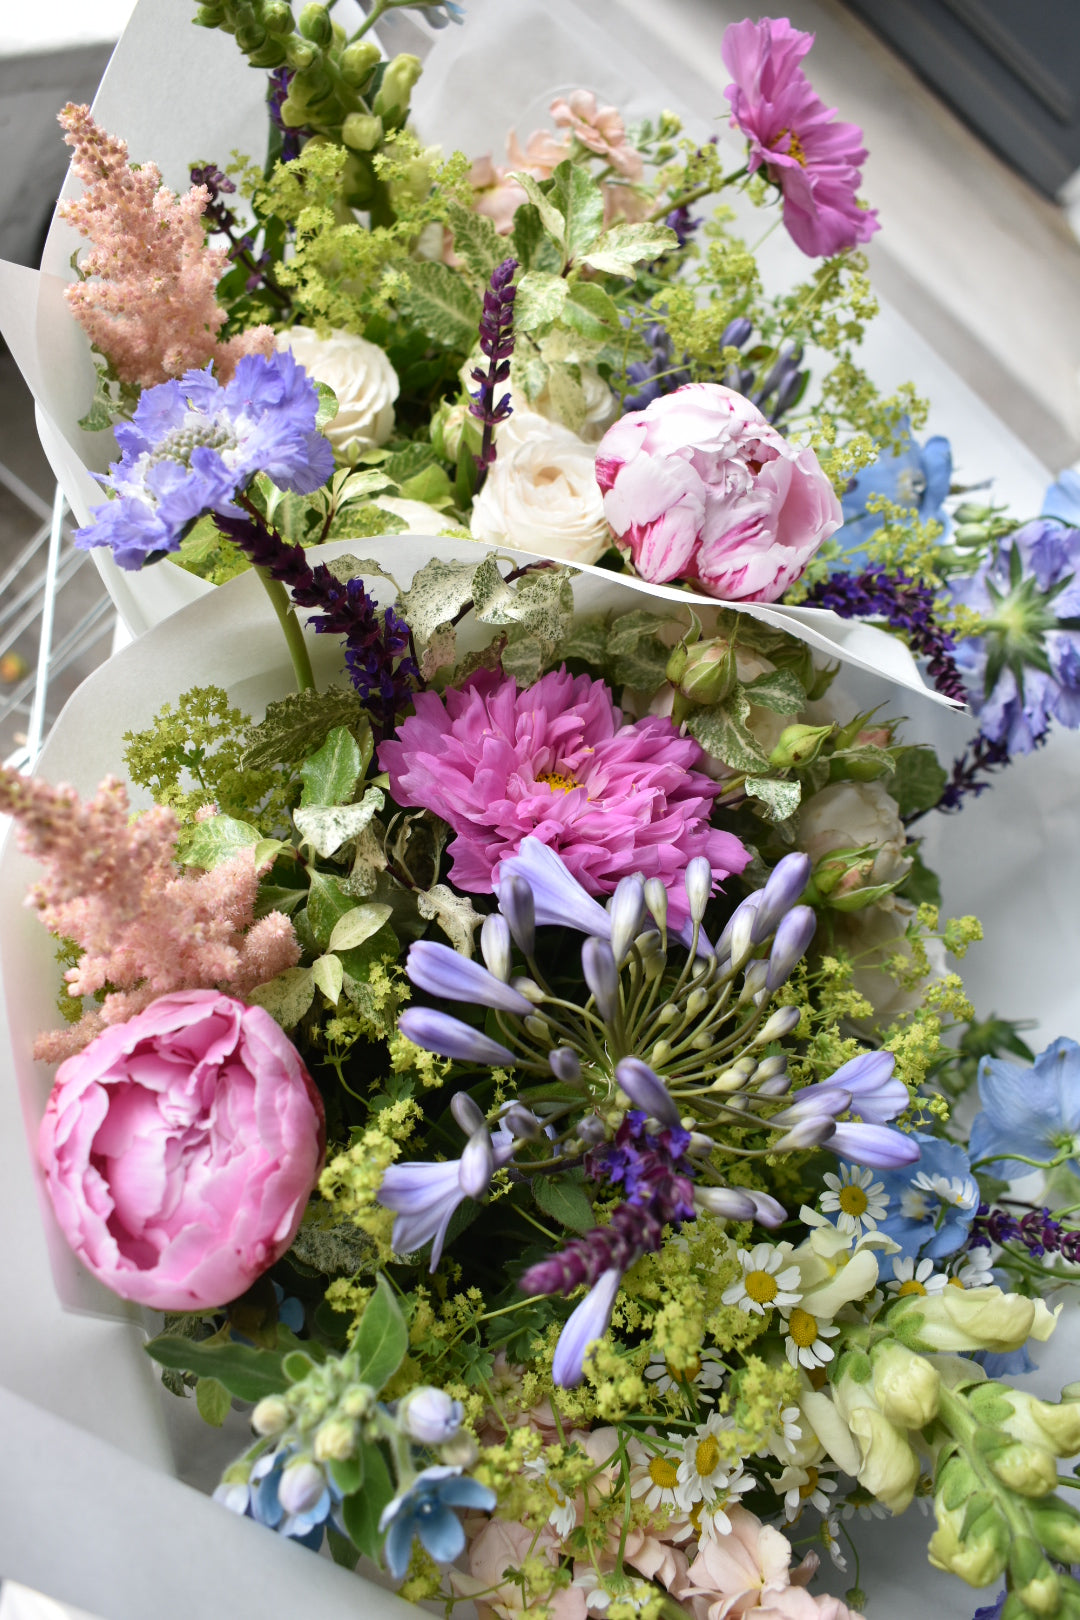 Bouquet of the week